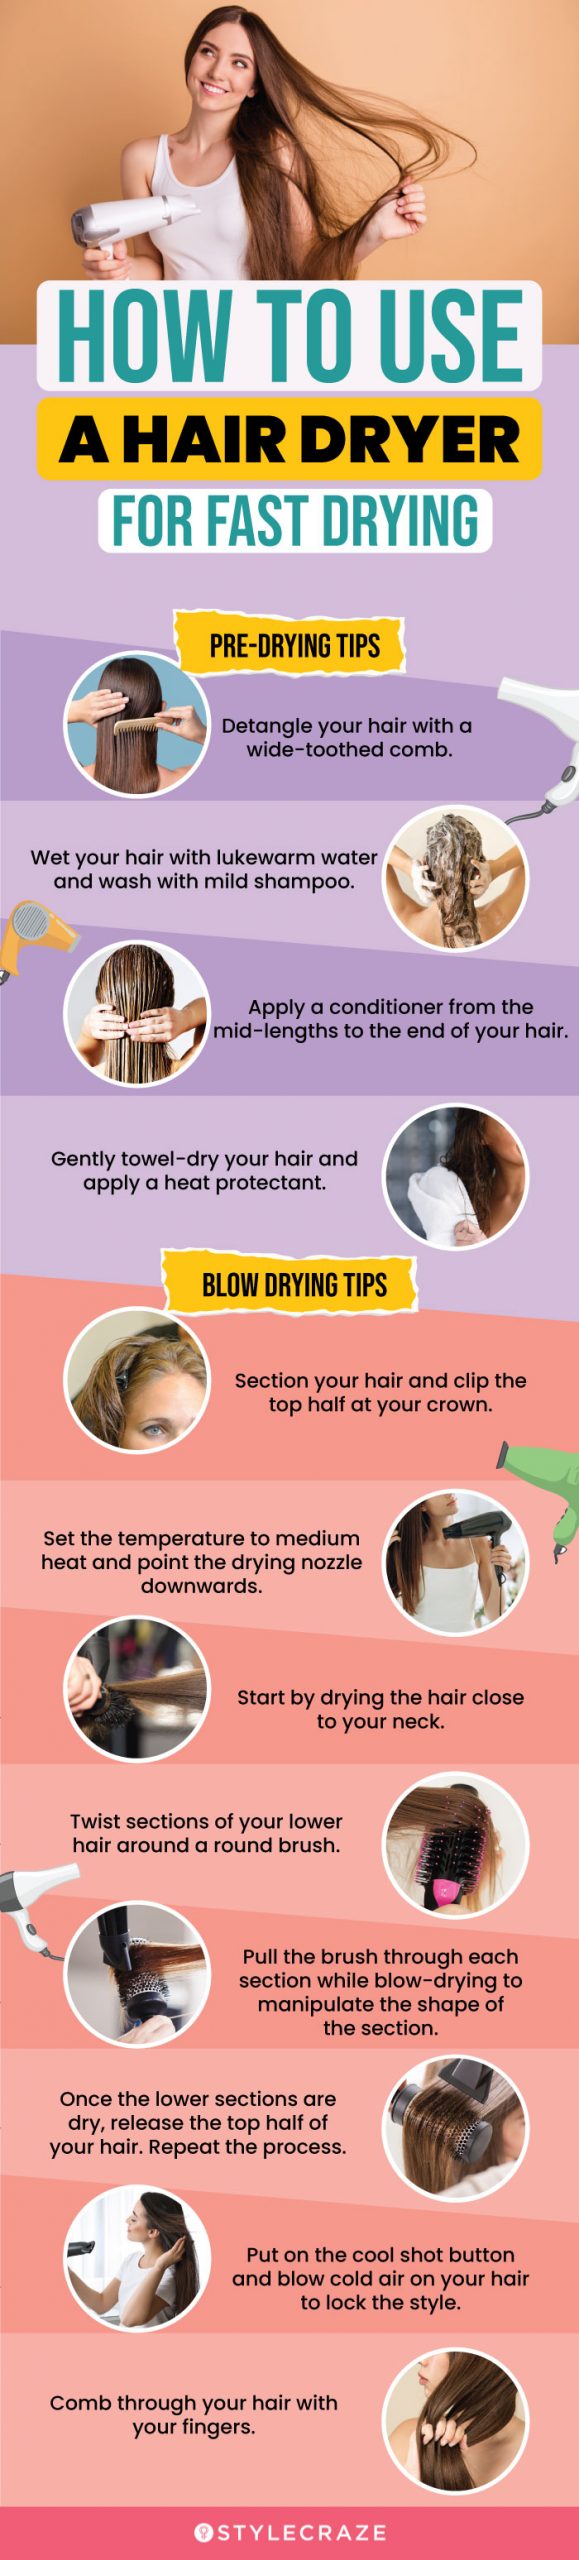 How To Use A Hair Dryer For Fast Drying (infographic)